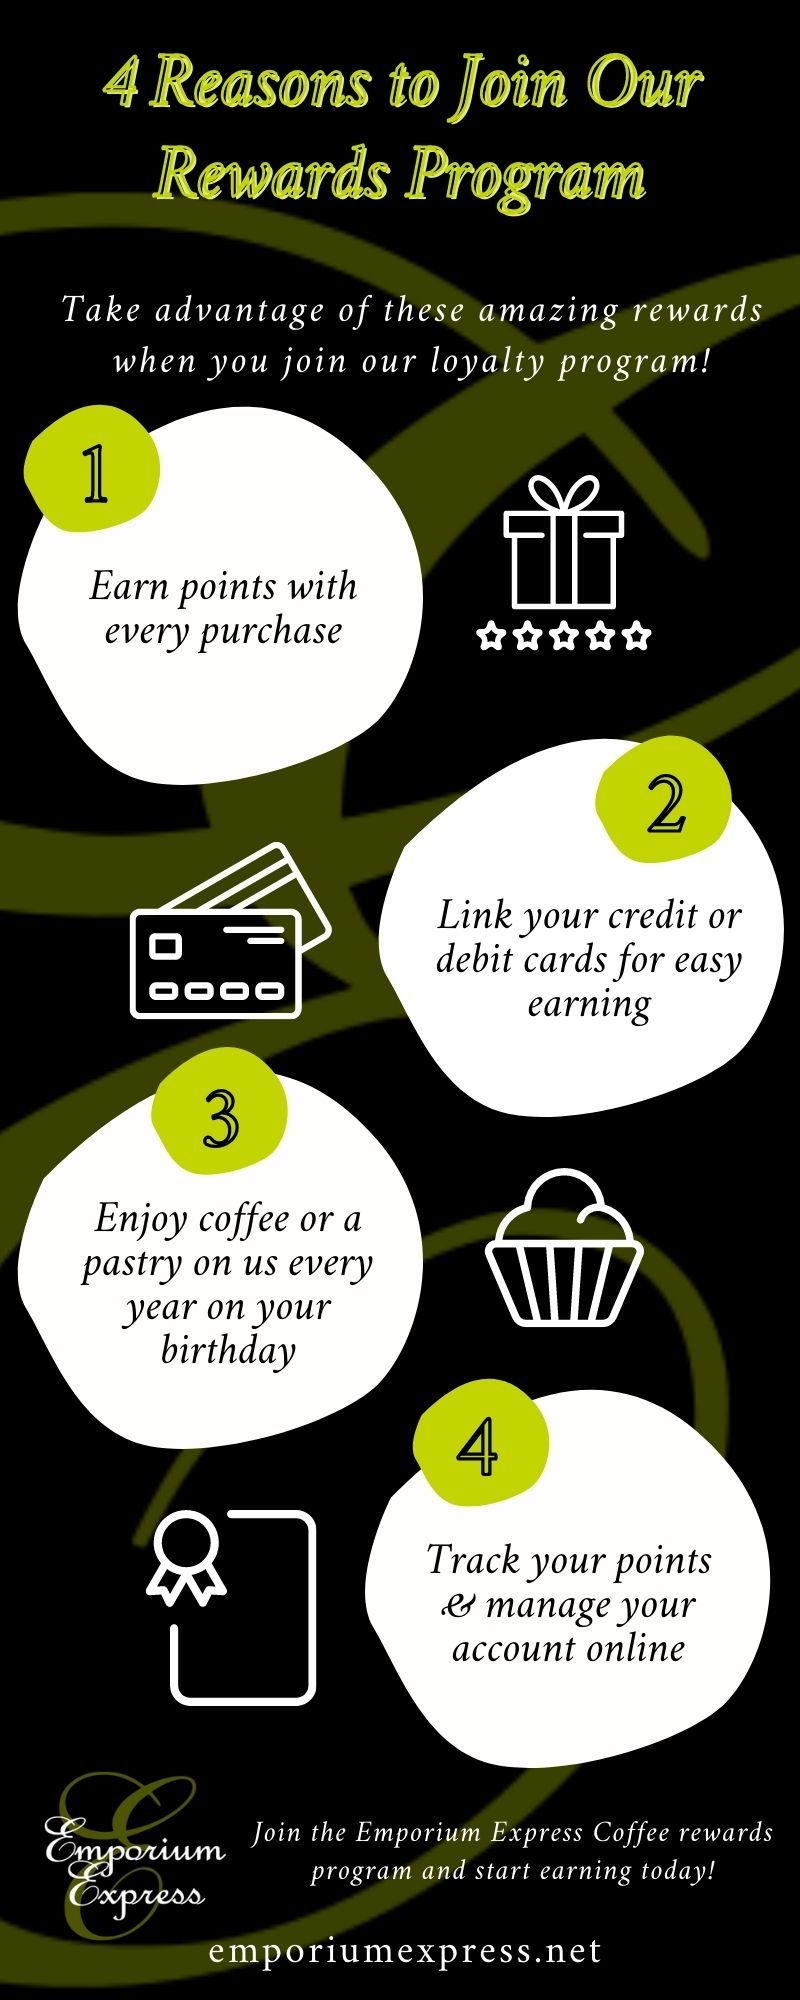 4 Reasons to Join Our Rewards Program (1).jpg